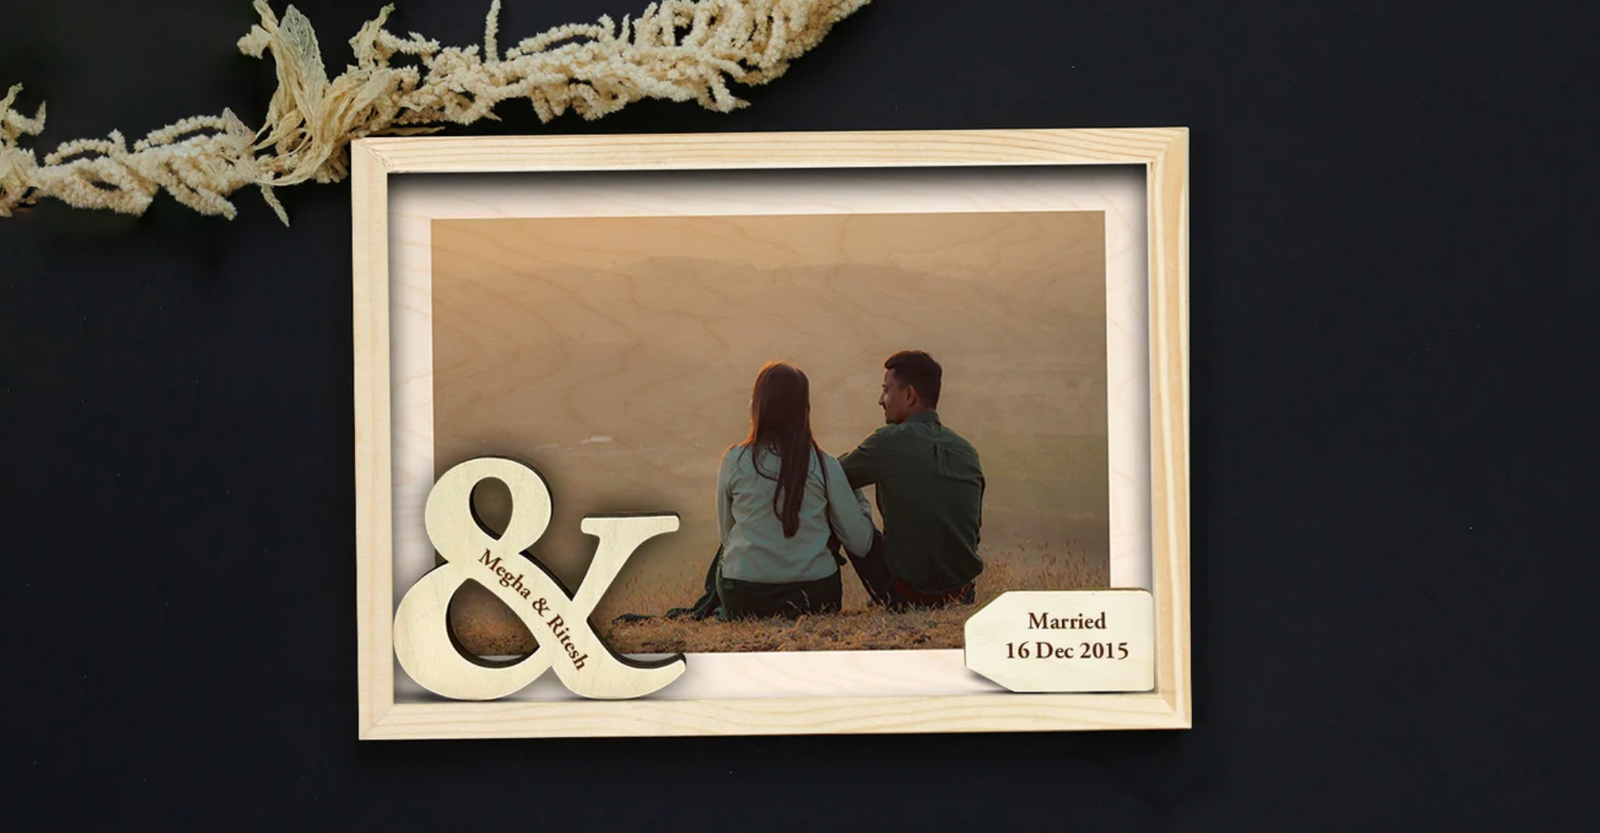 Top 10 Anniversary Gift Ideas for Couples: Unique and Personalized Options for Every Budget